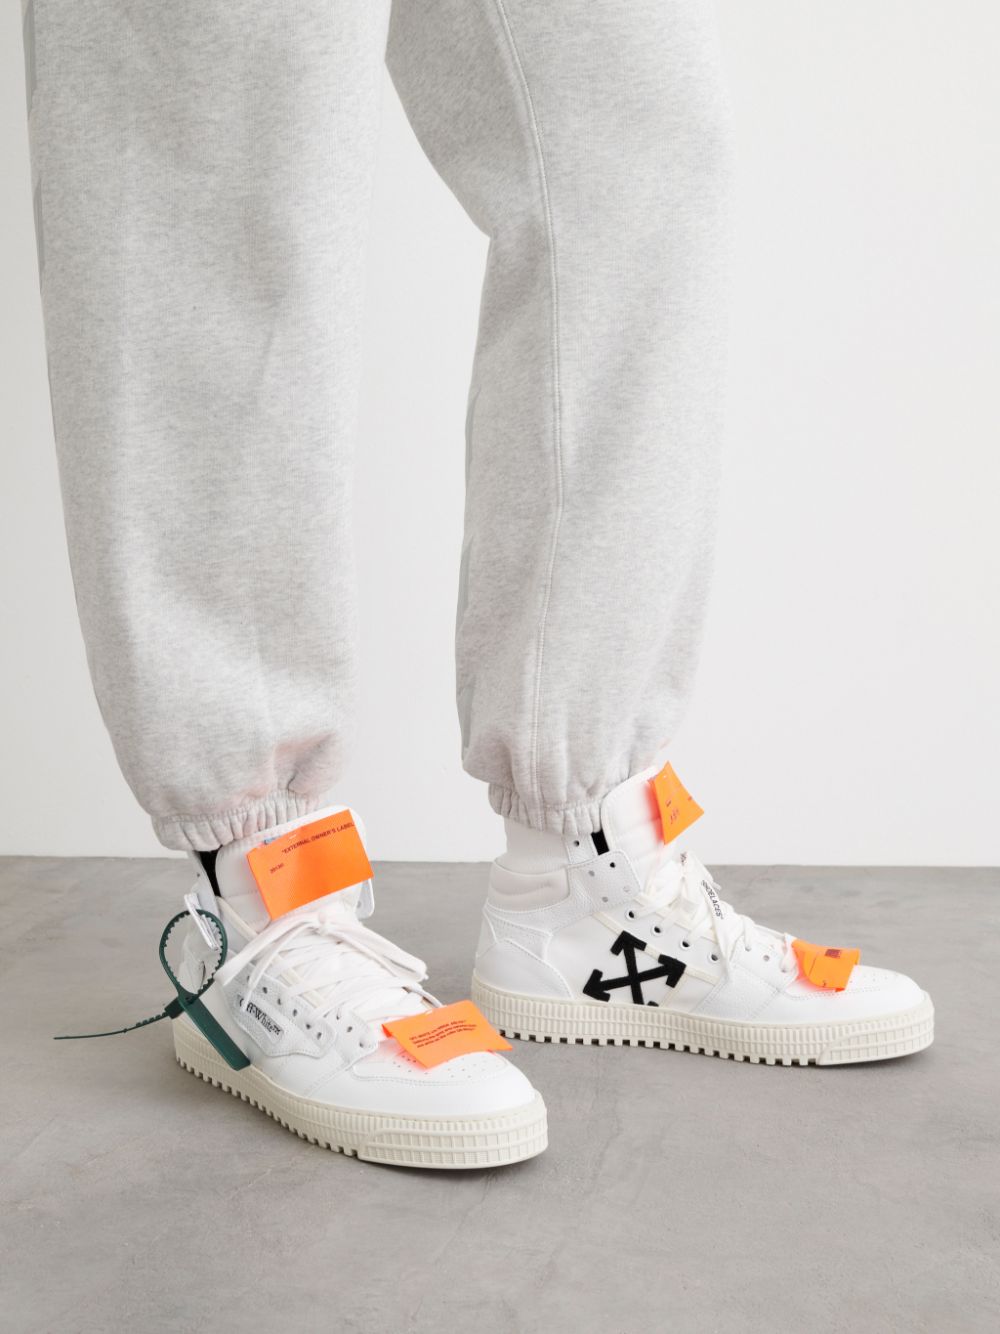 https://cdn-images.farfetch-contents.com/off-white-3-0-off-court-leather_18487344_42666424_1000.jpg